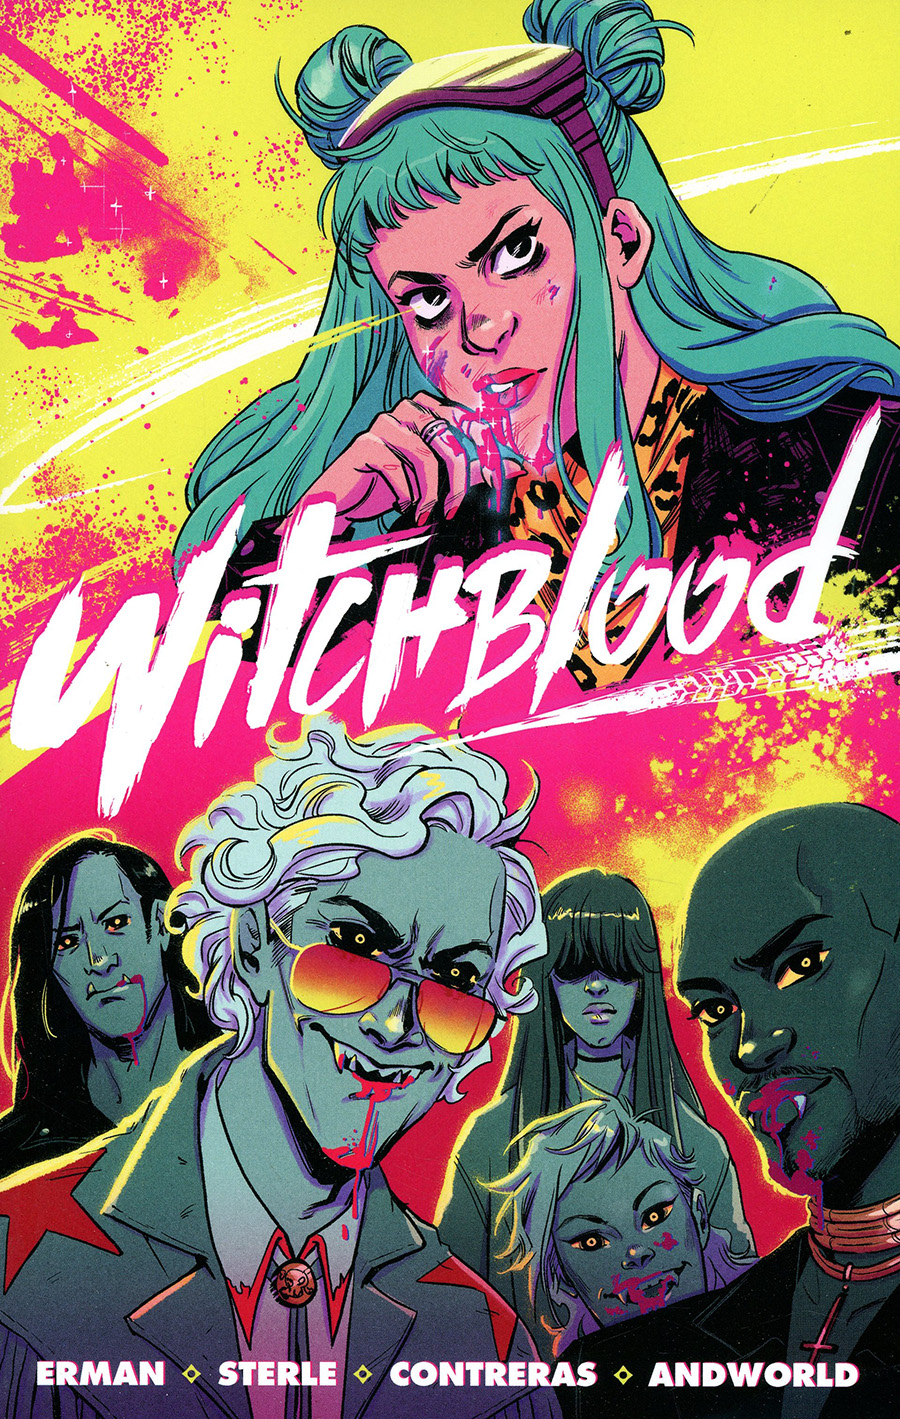 Witchblood TP